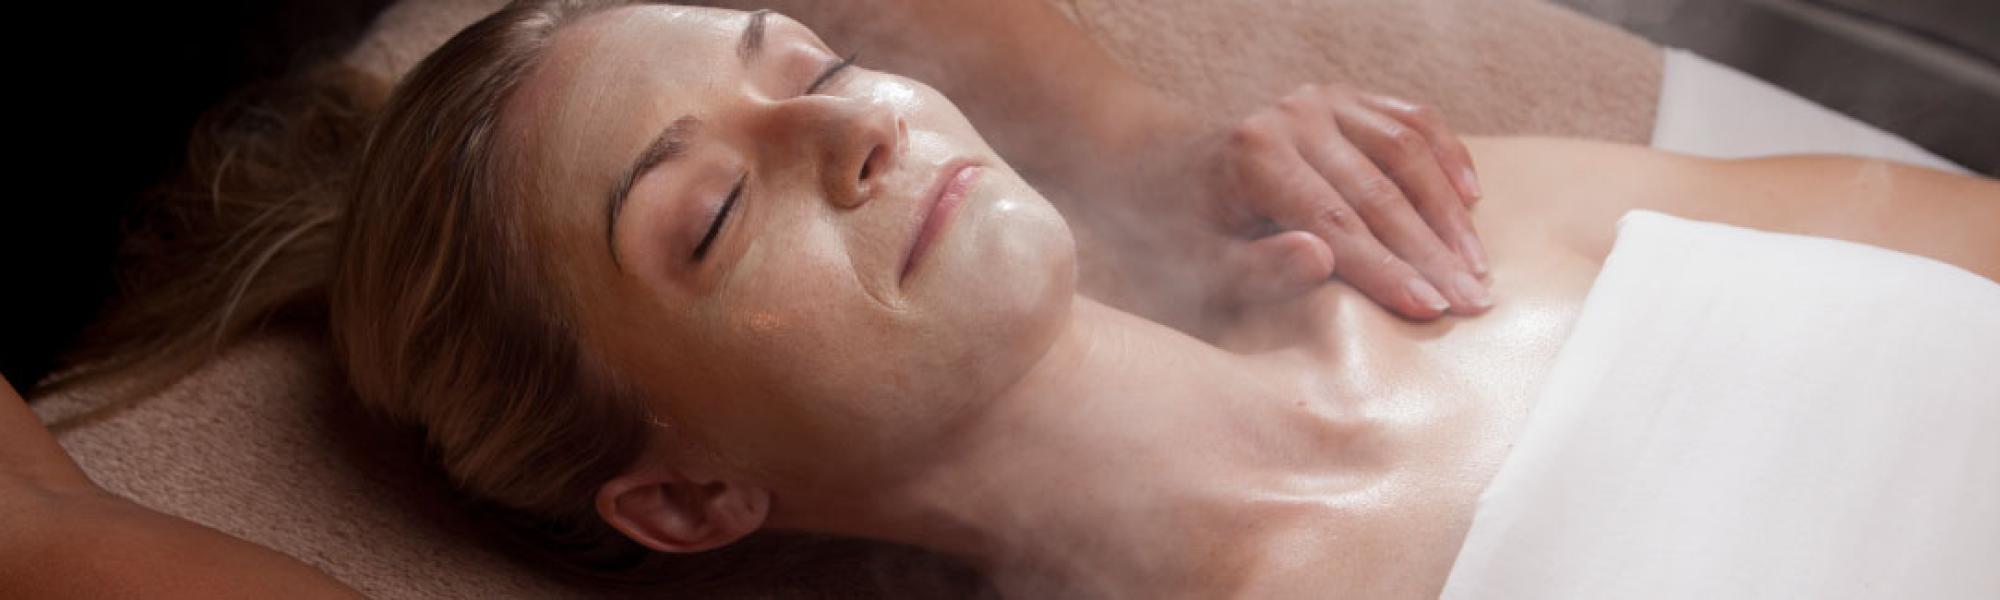 Dosha Day Spa Packages